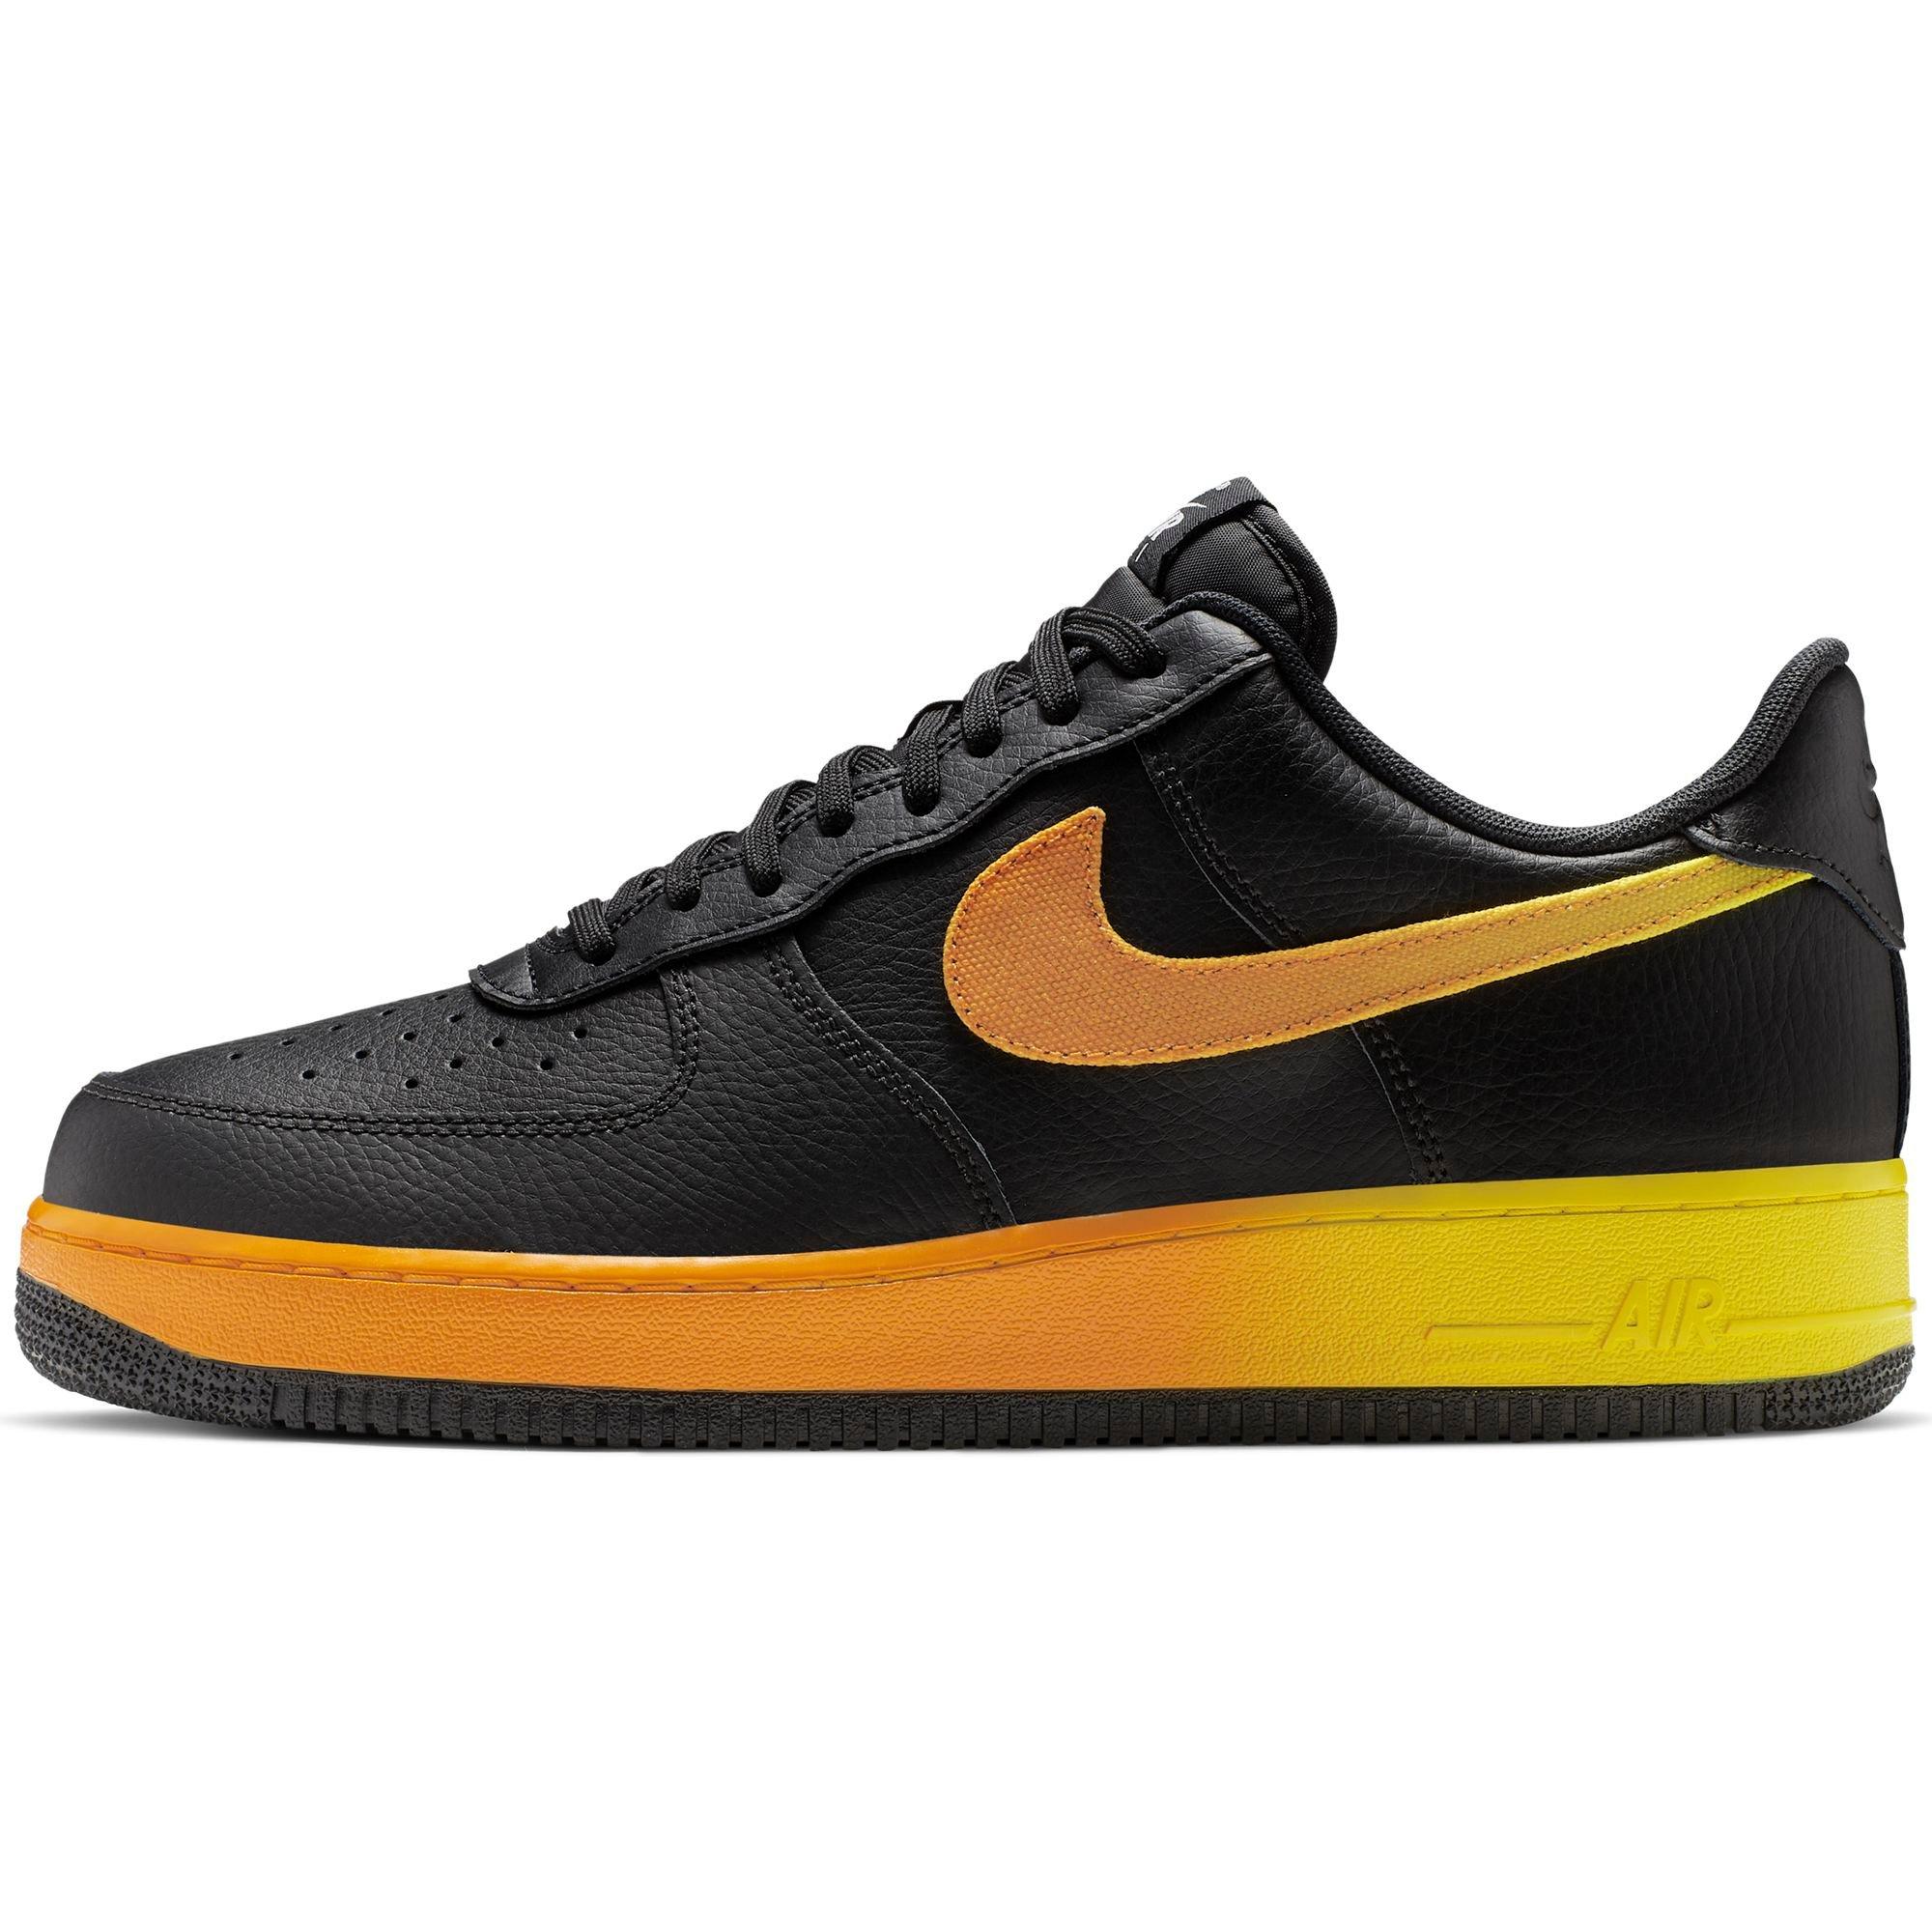 air force 1 yellow and orange